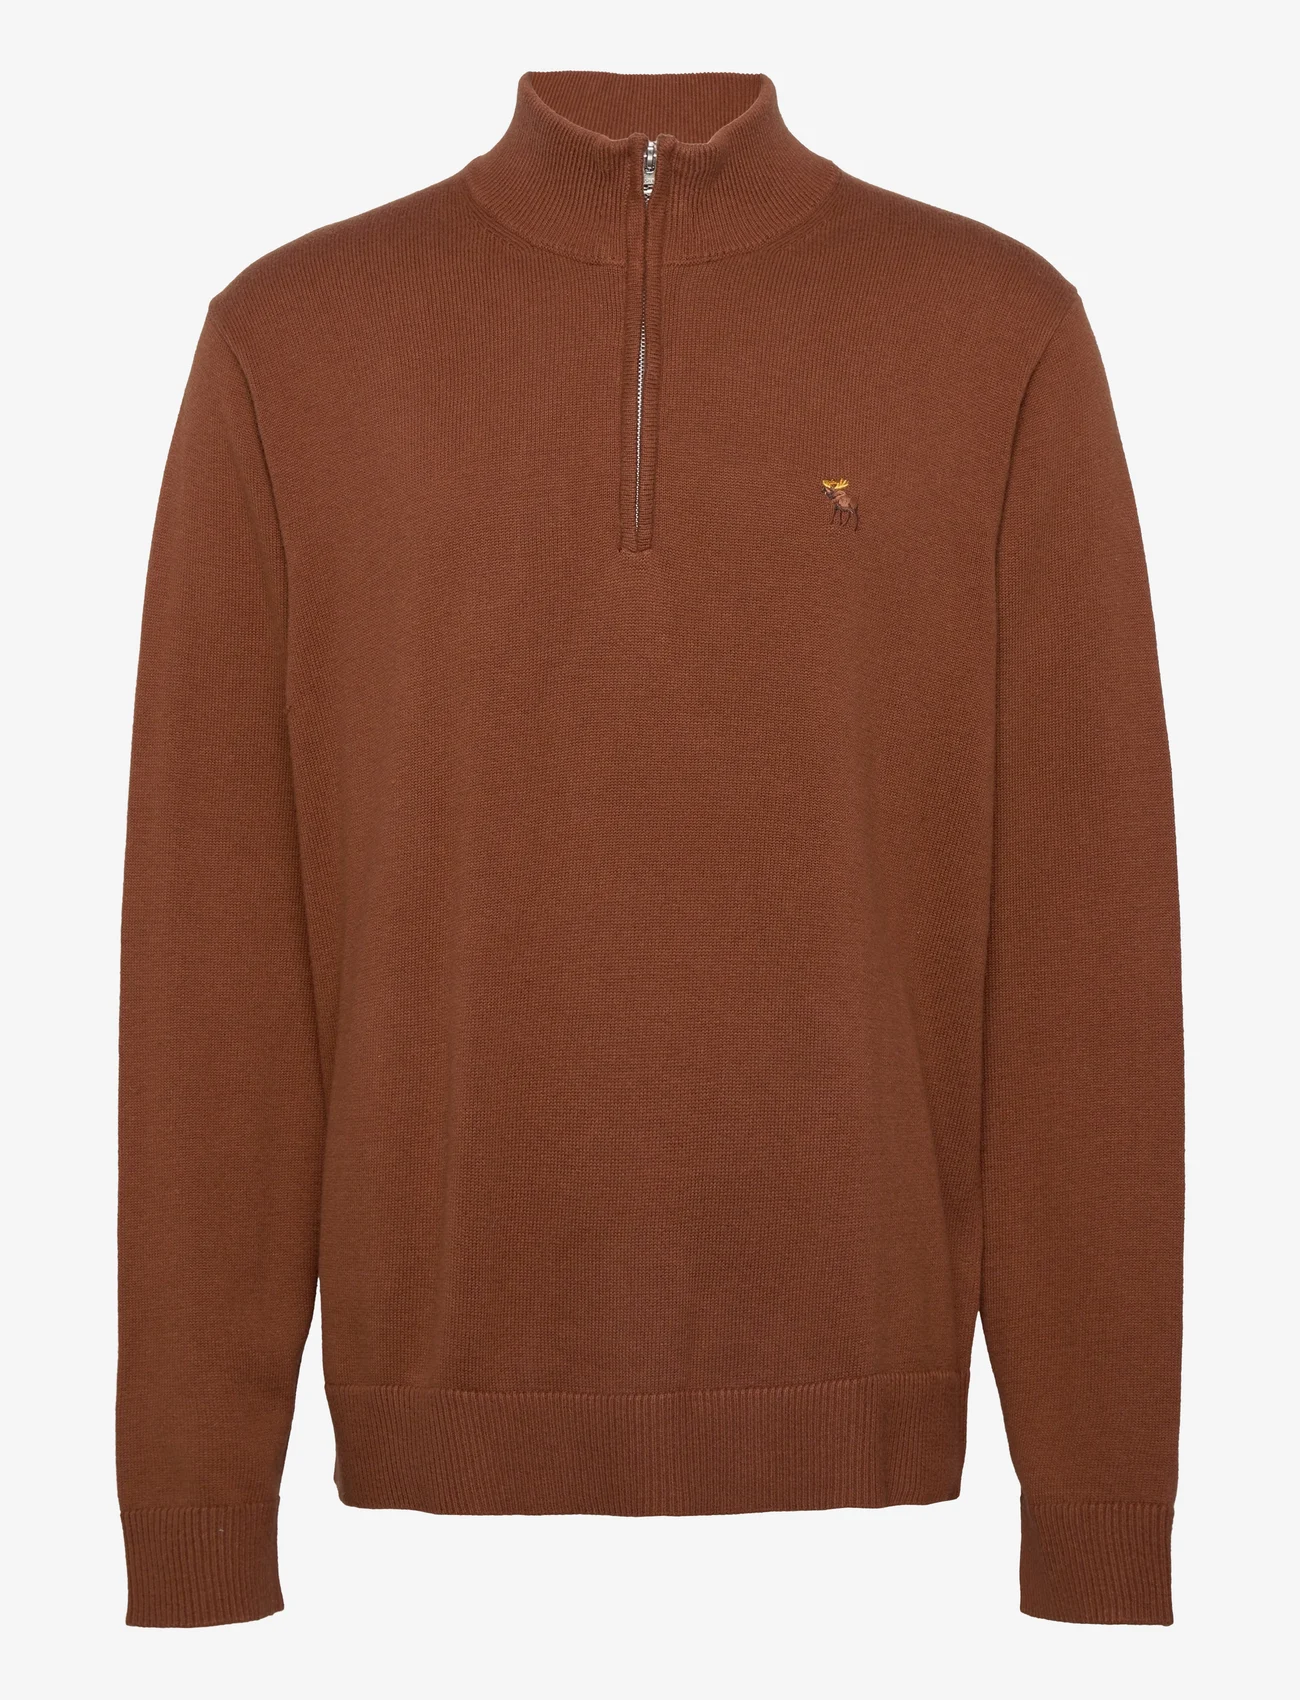 Abercrombie & Fitch - ANF MENS SWEATERS - perusneuleet - brown - 0